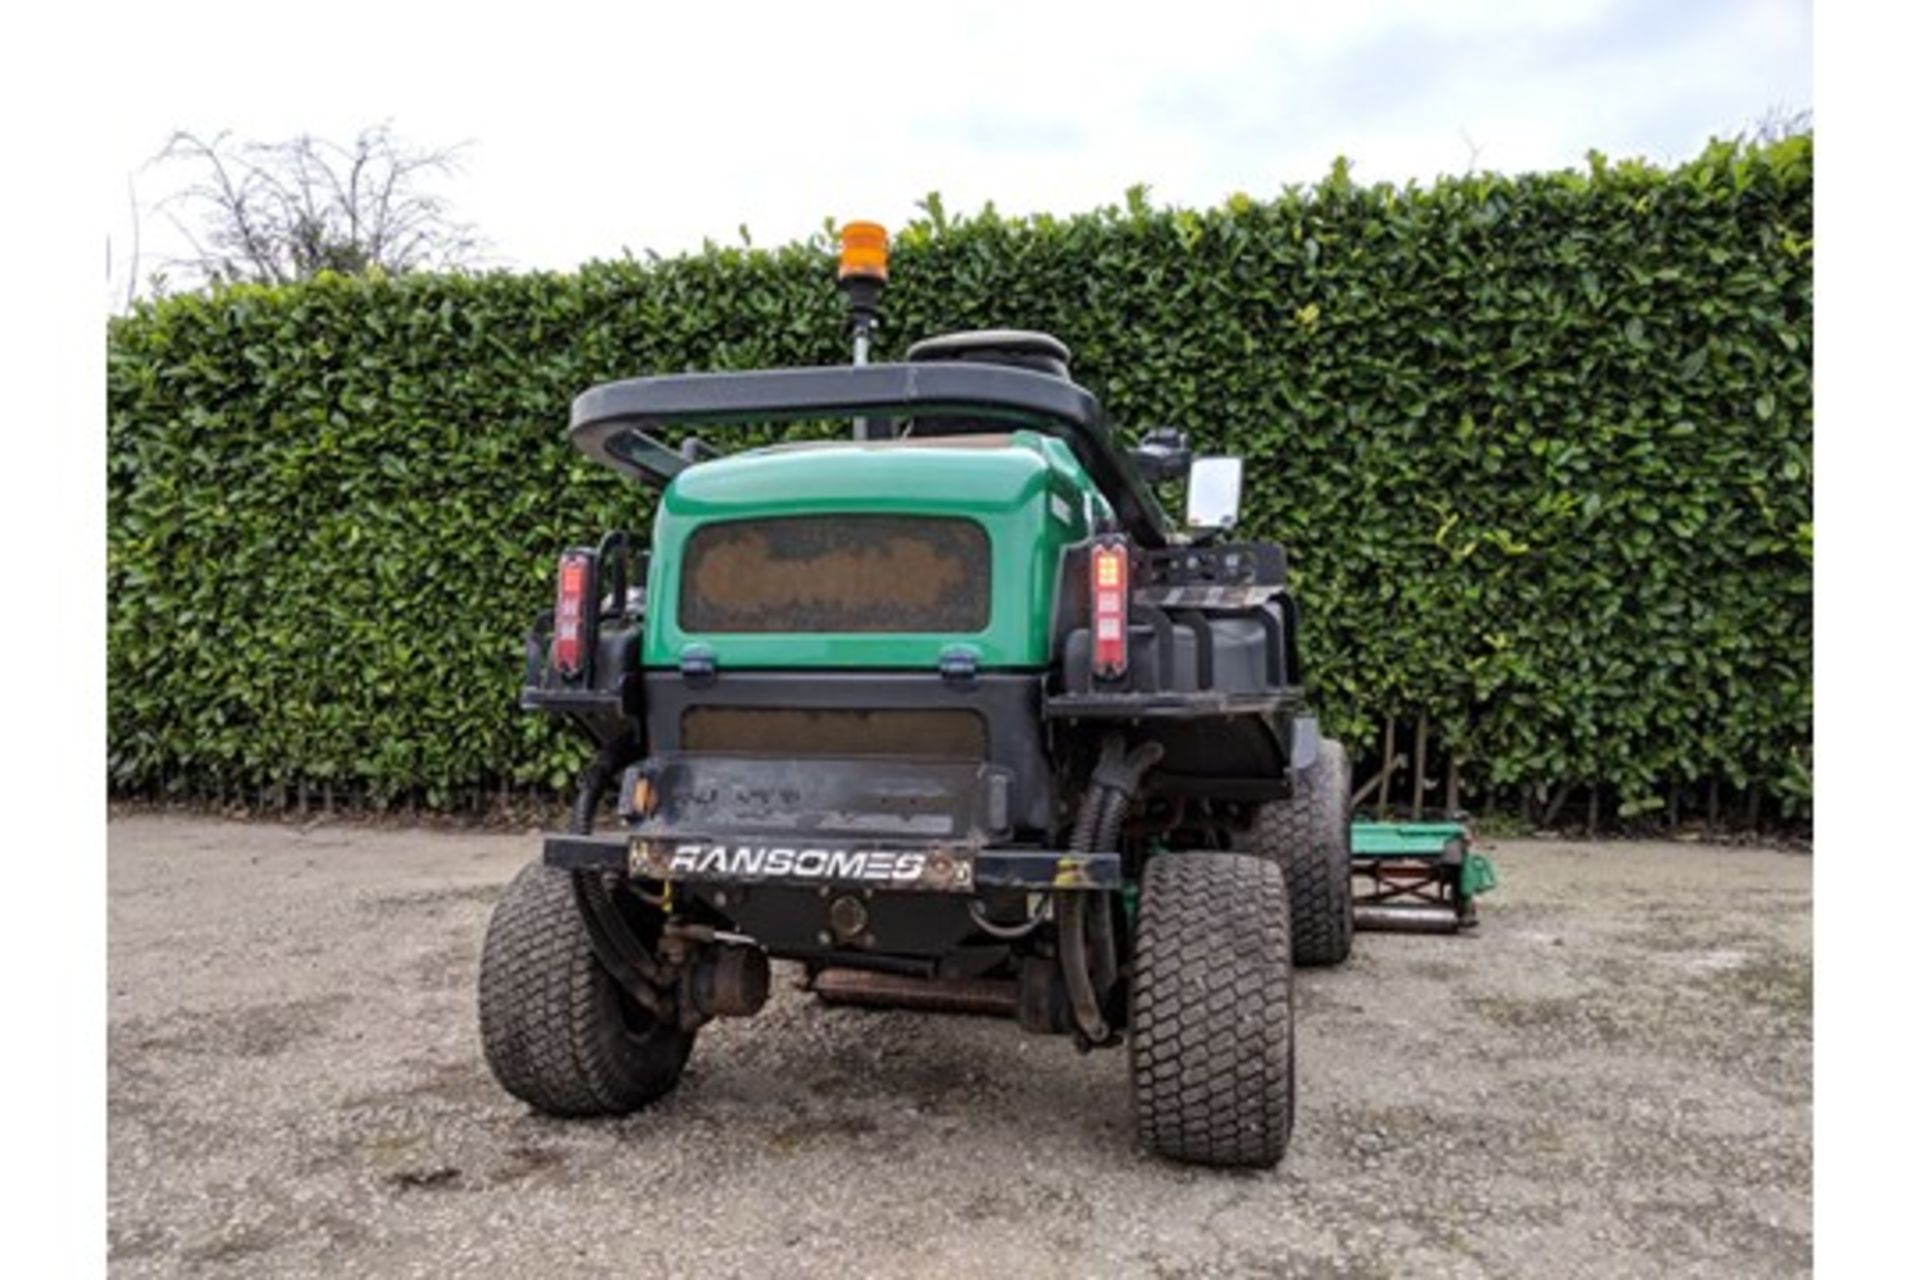 2012 Ransomes Parkway 3 4WD Triple Cylinder Mower - Image 6 of 8